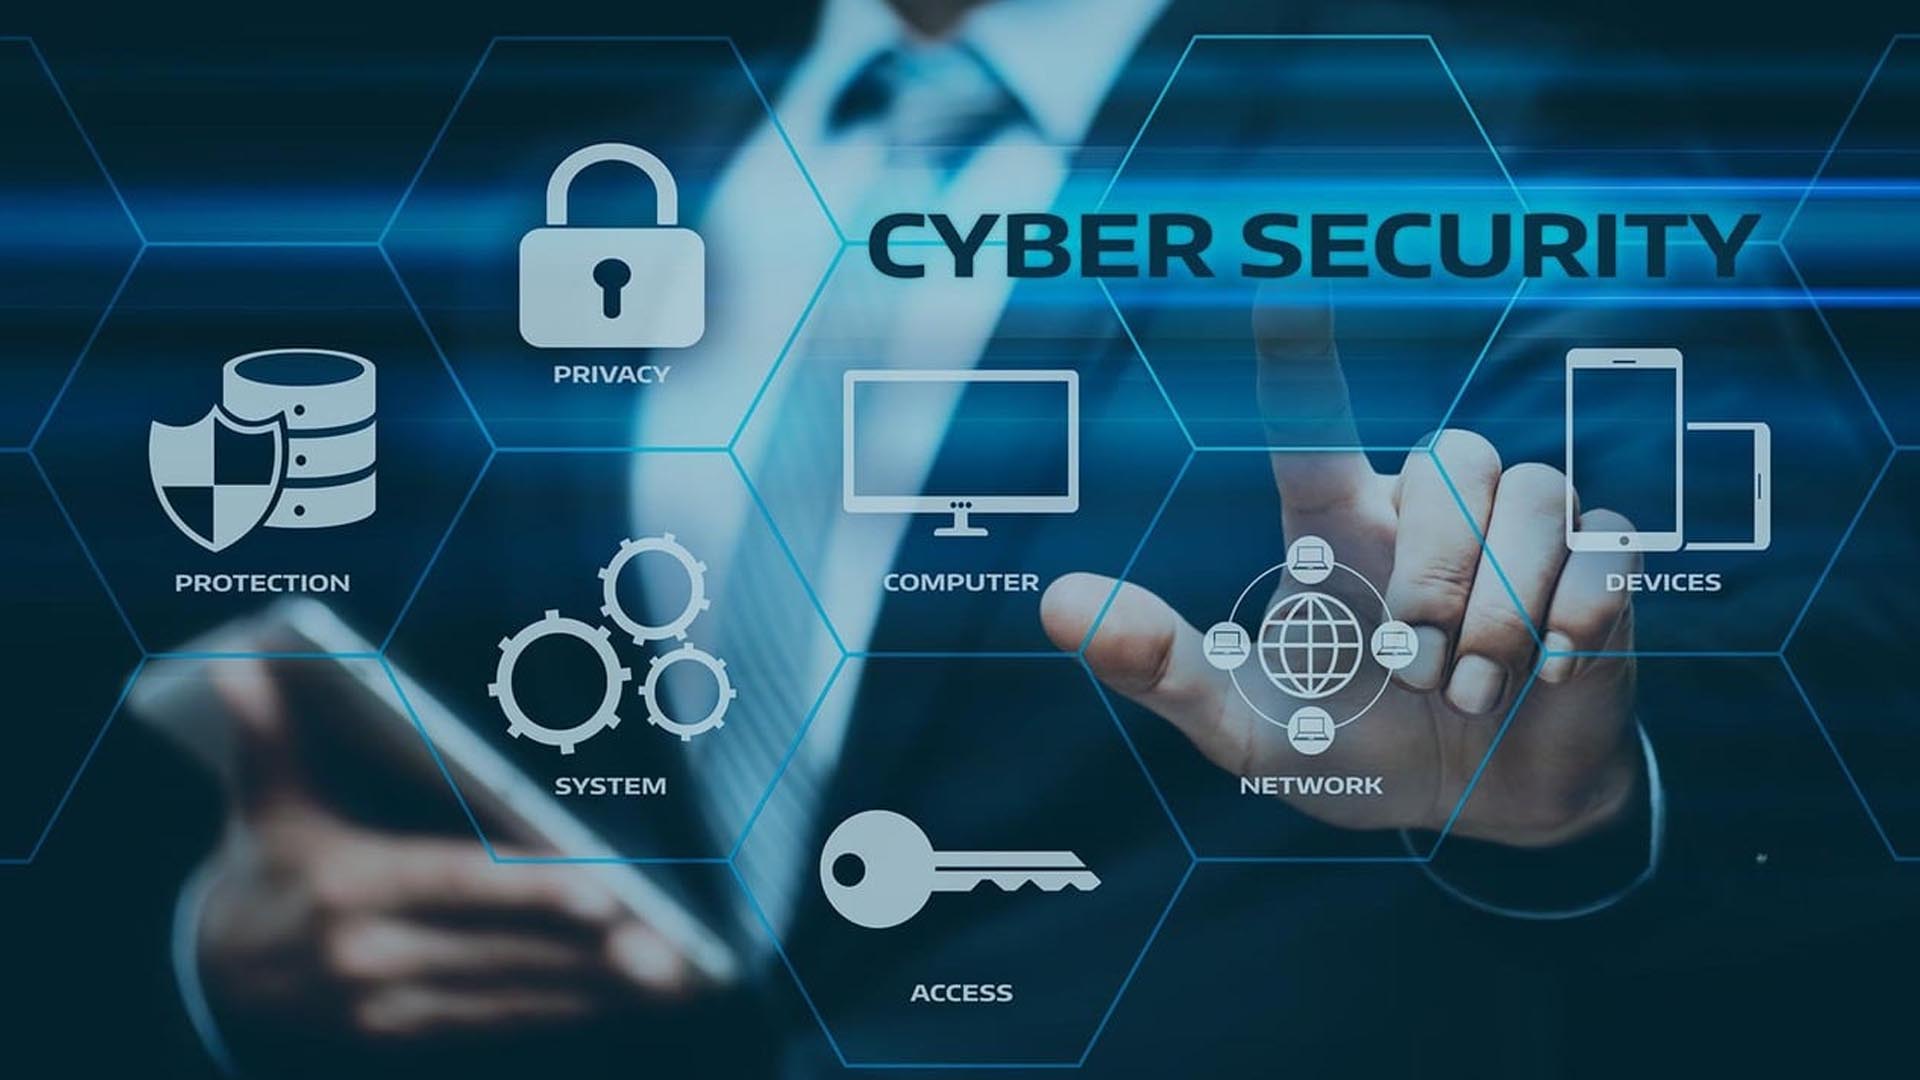 Quick Wins for Your Cyber Security Programs